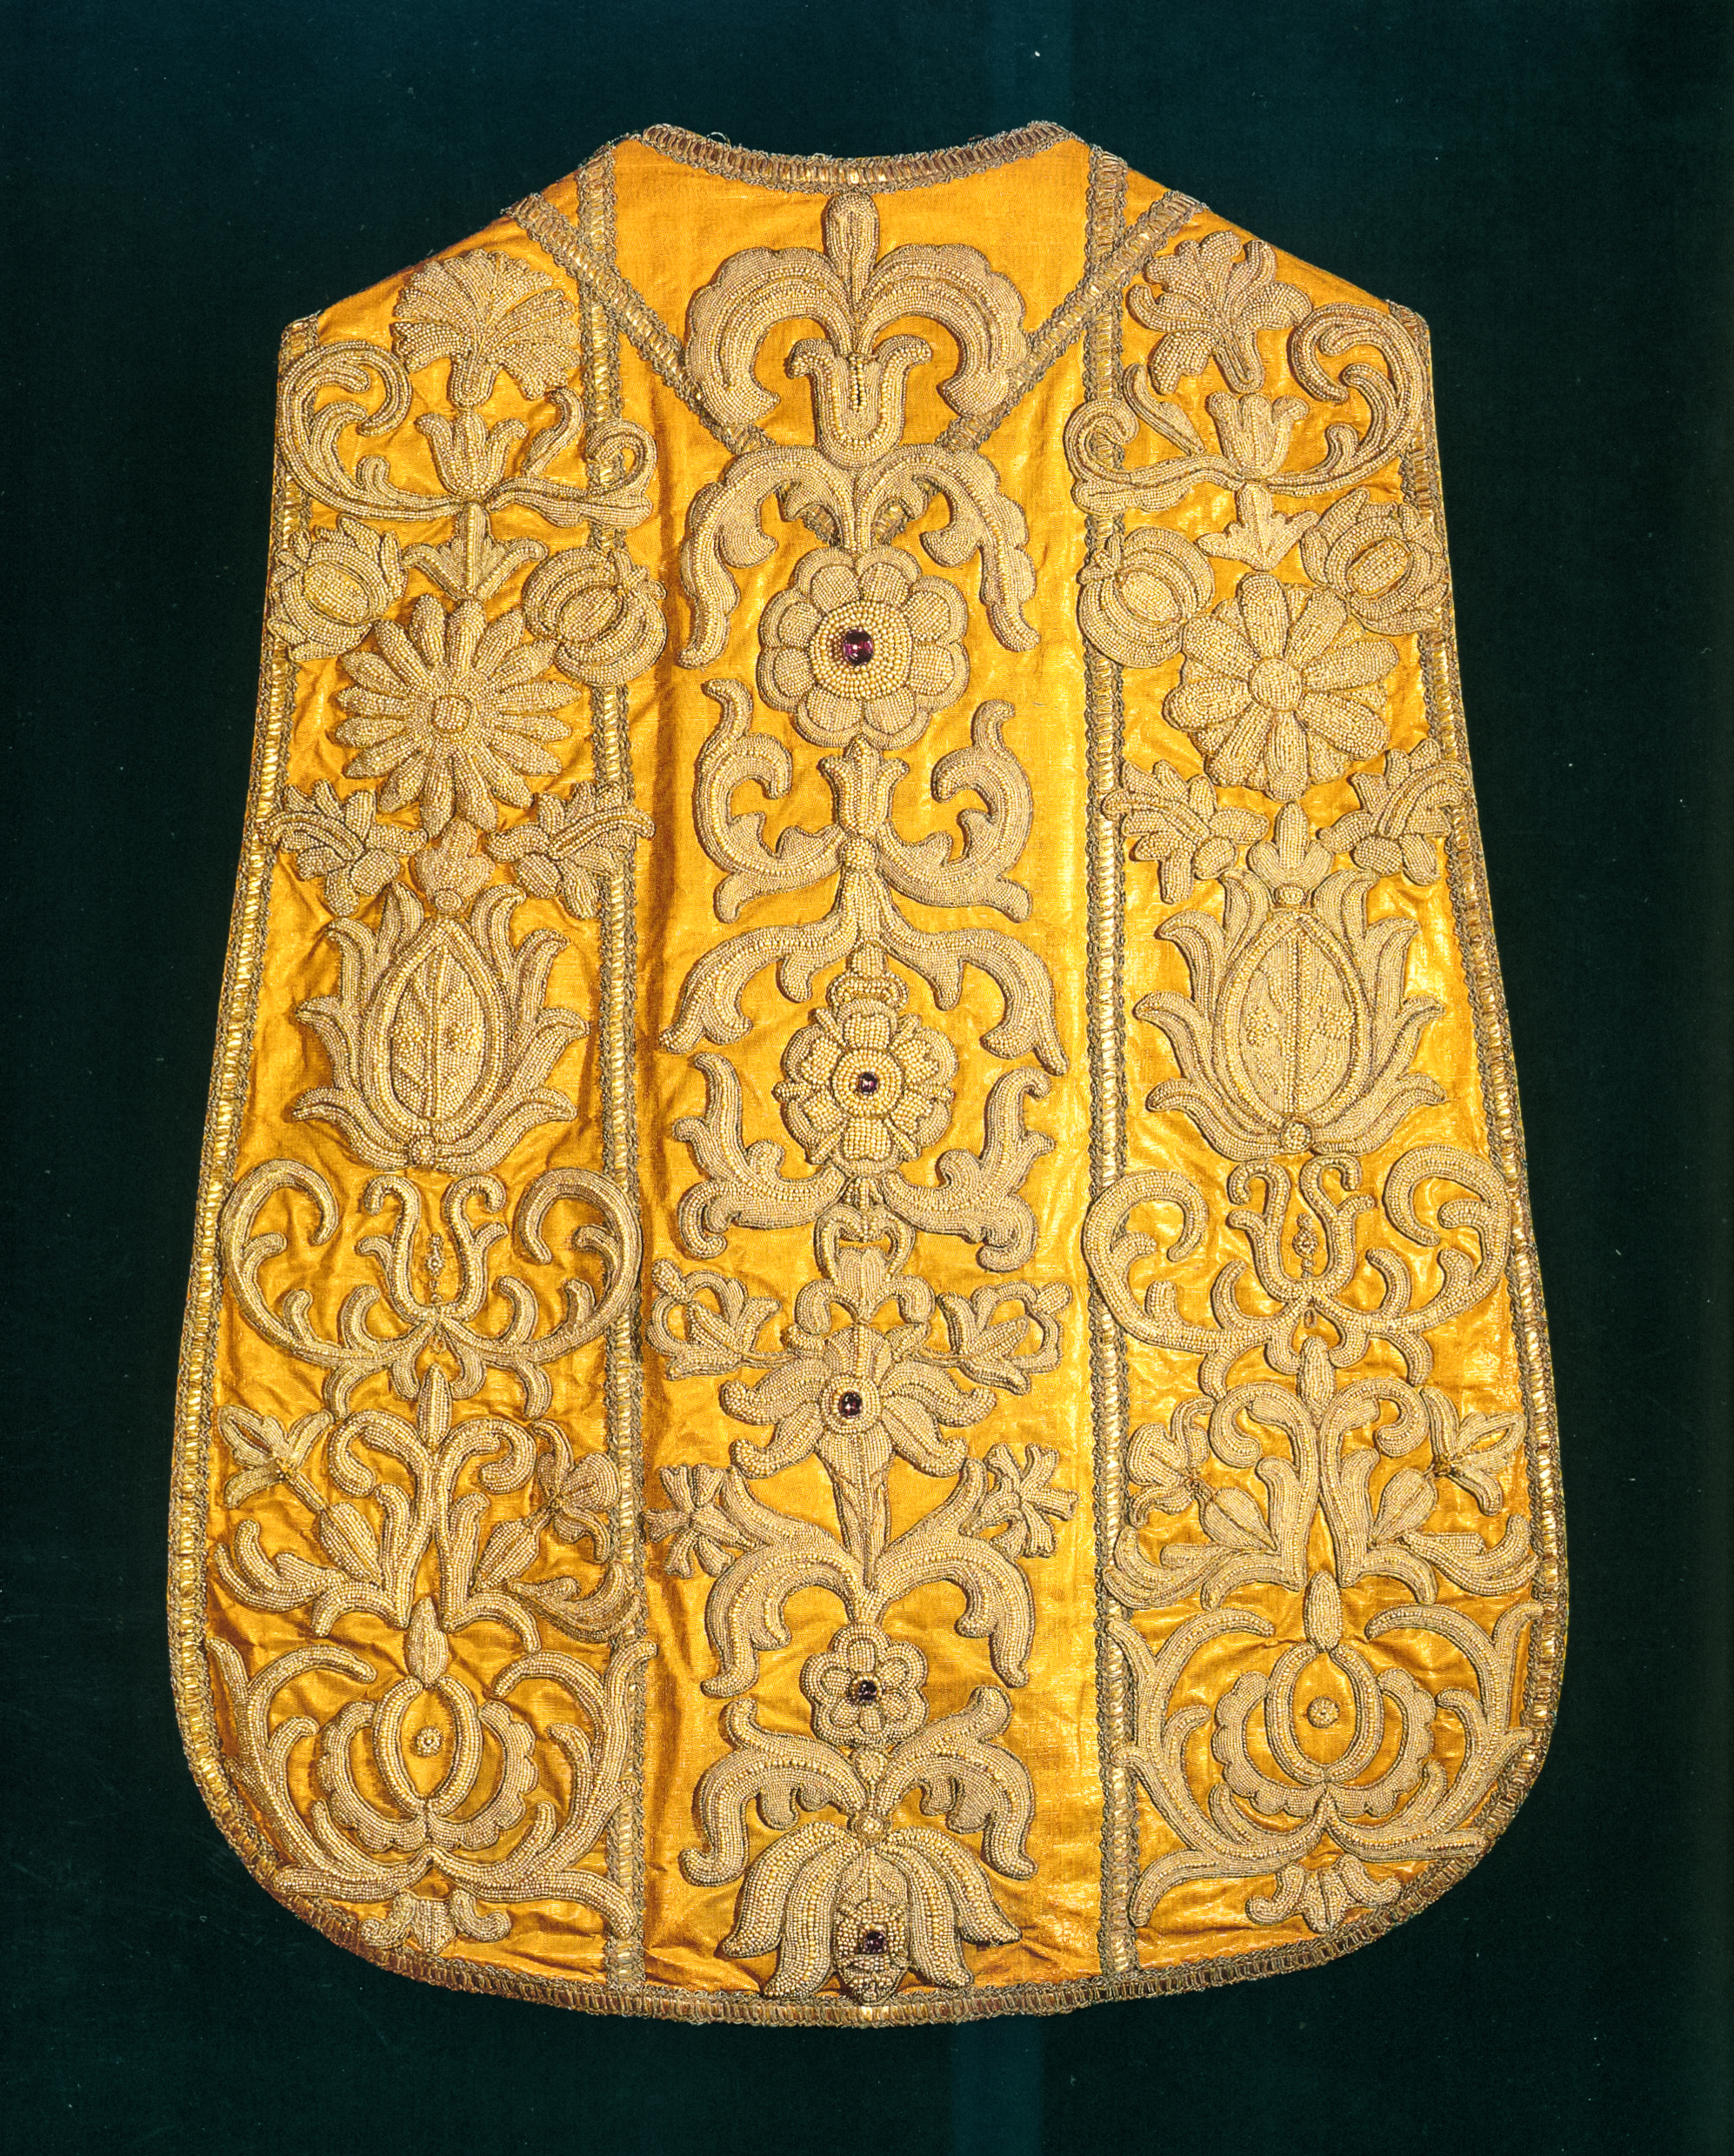 Coronation chasuble, Hungarian embroidery from the second half of the 17th century